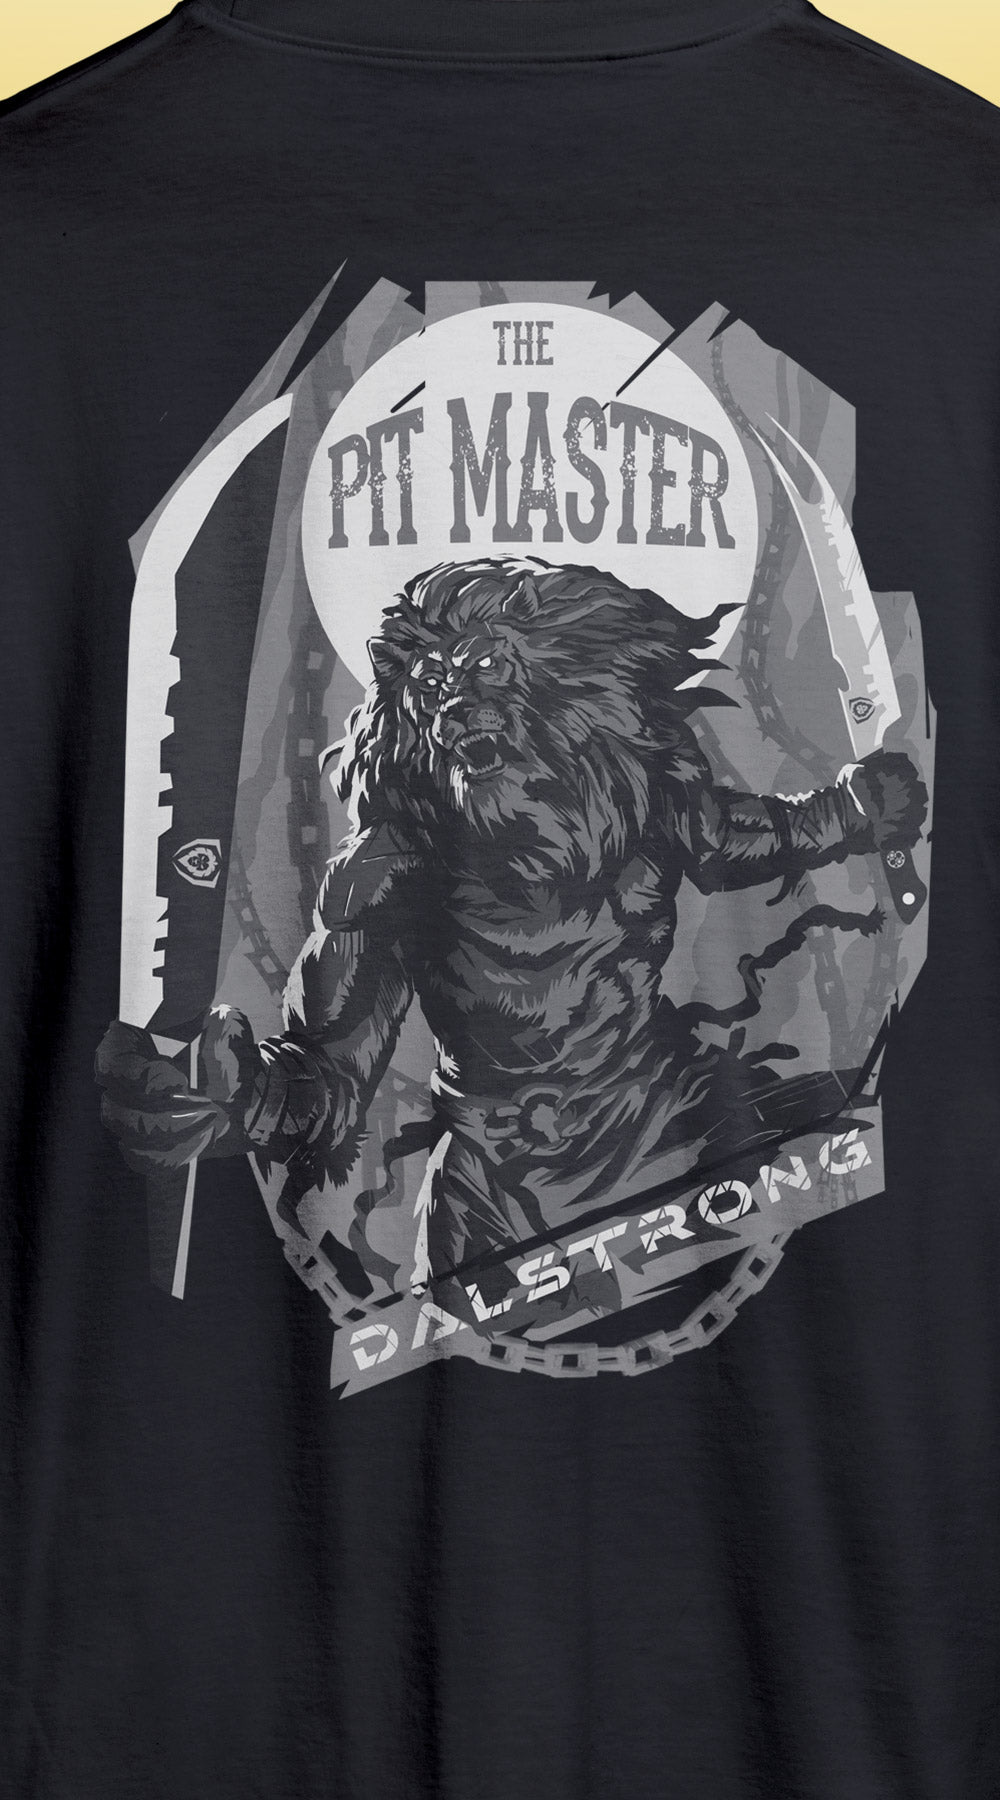 Dalstrong beast mode on tee black back design.